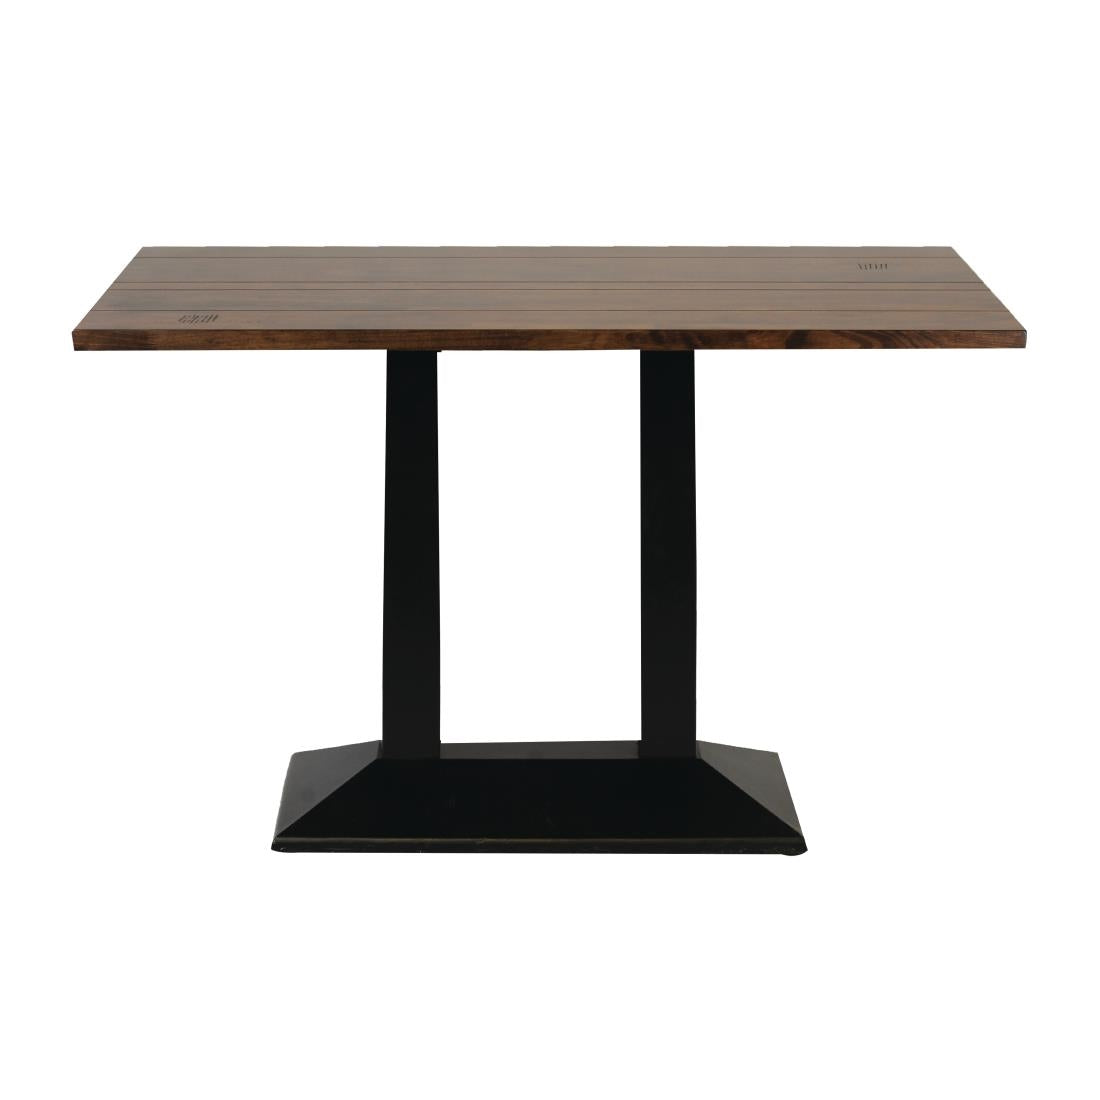 FT515 Turin Metal Base Pedestal Rectangle Table with Vintage Top 1200x760mm JD Catering Equipment Solutions Ltd